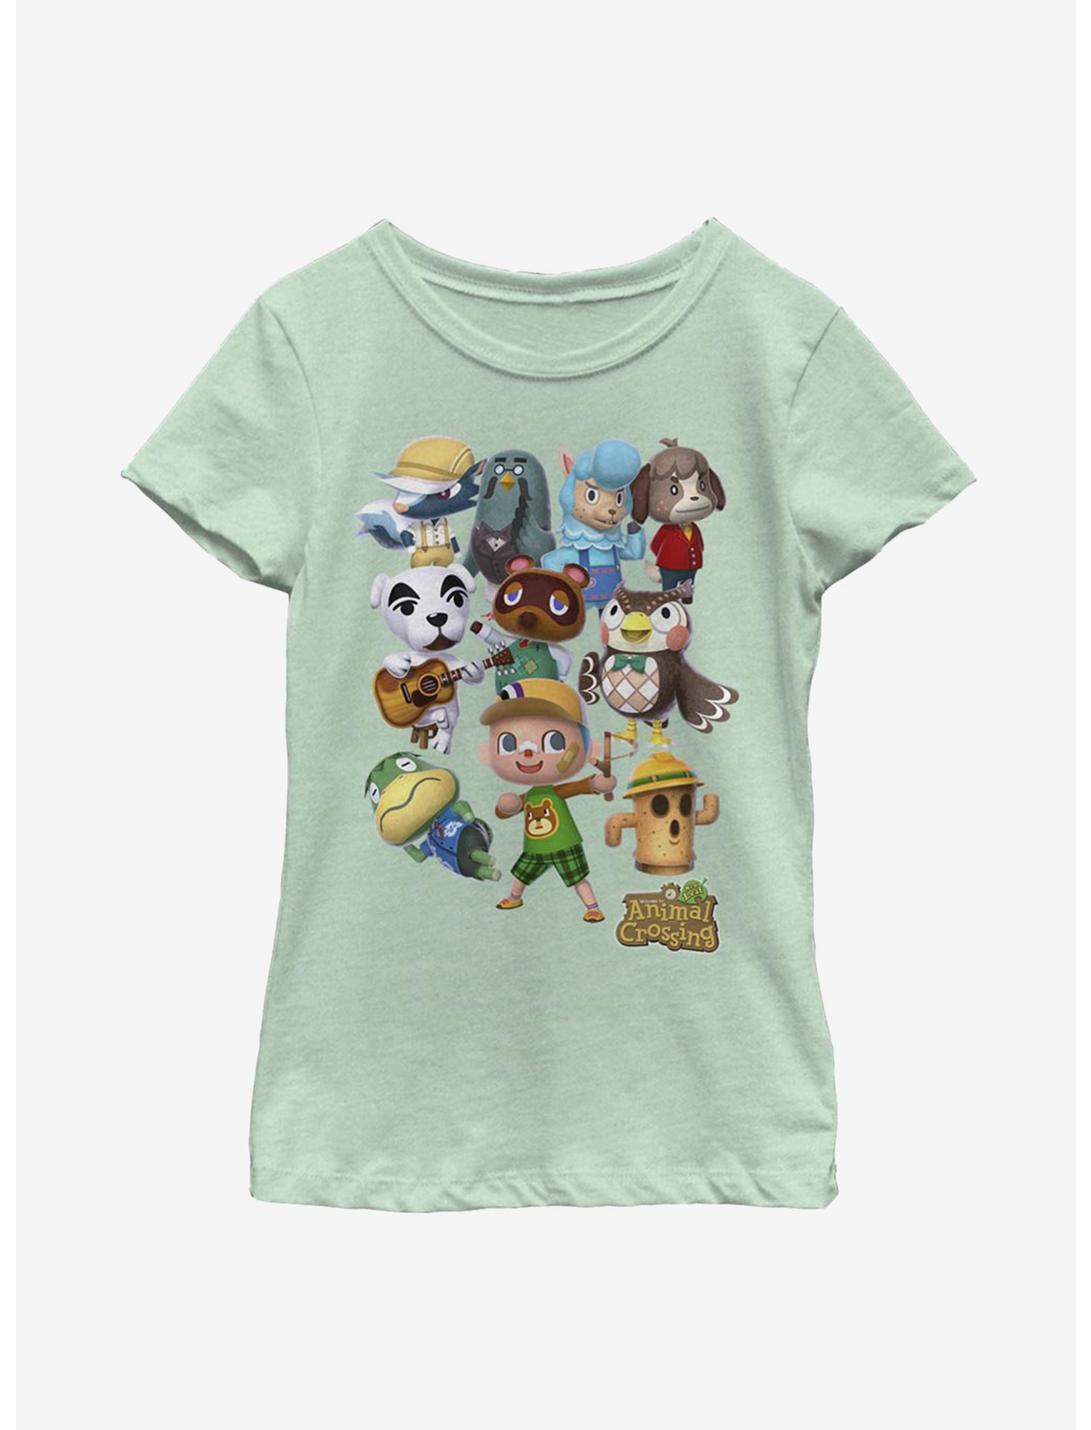 Animal Crossing Welcome Back Youth Girls T-Shirt, MINT, hi-res